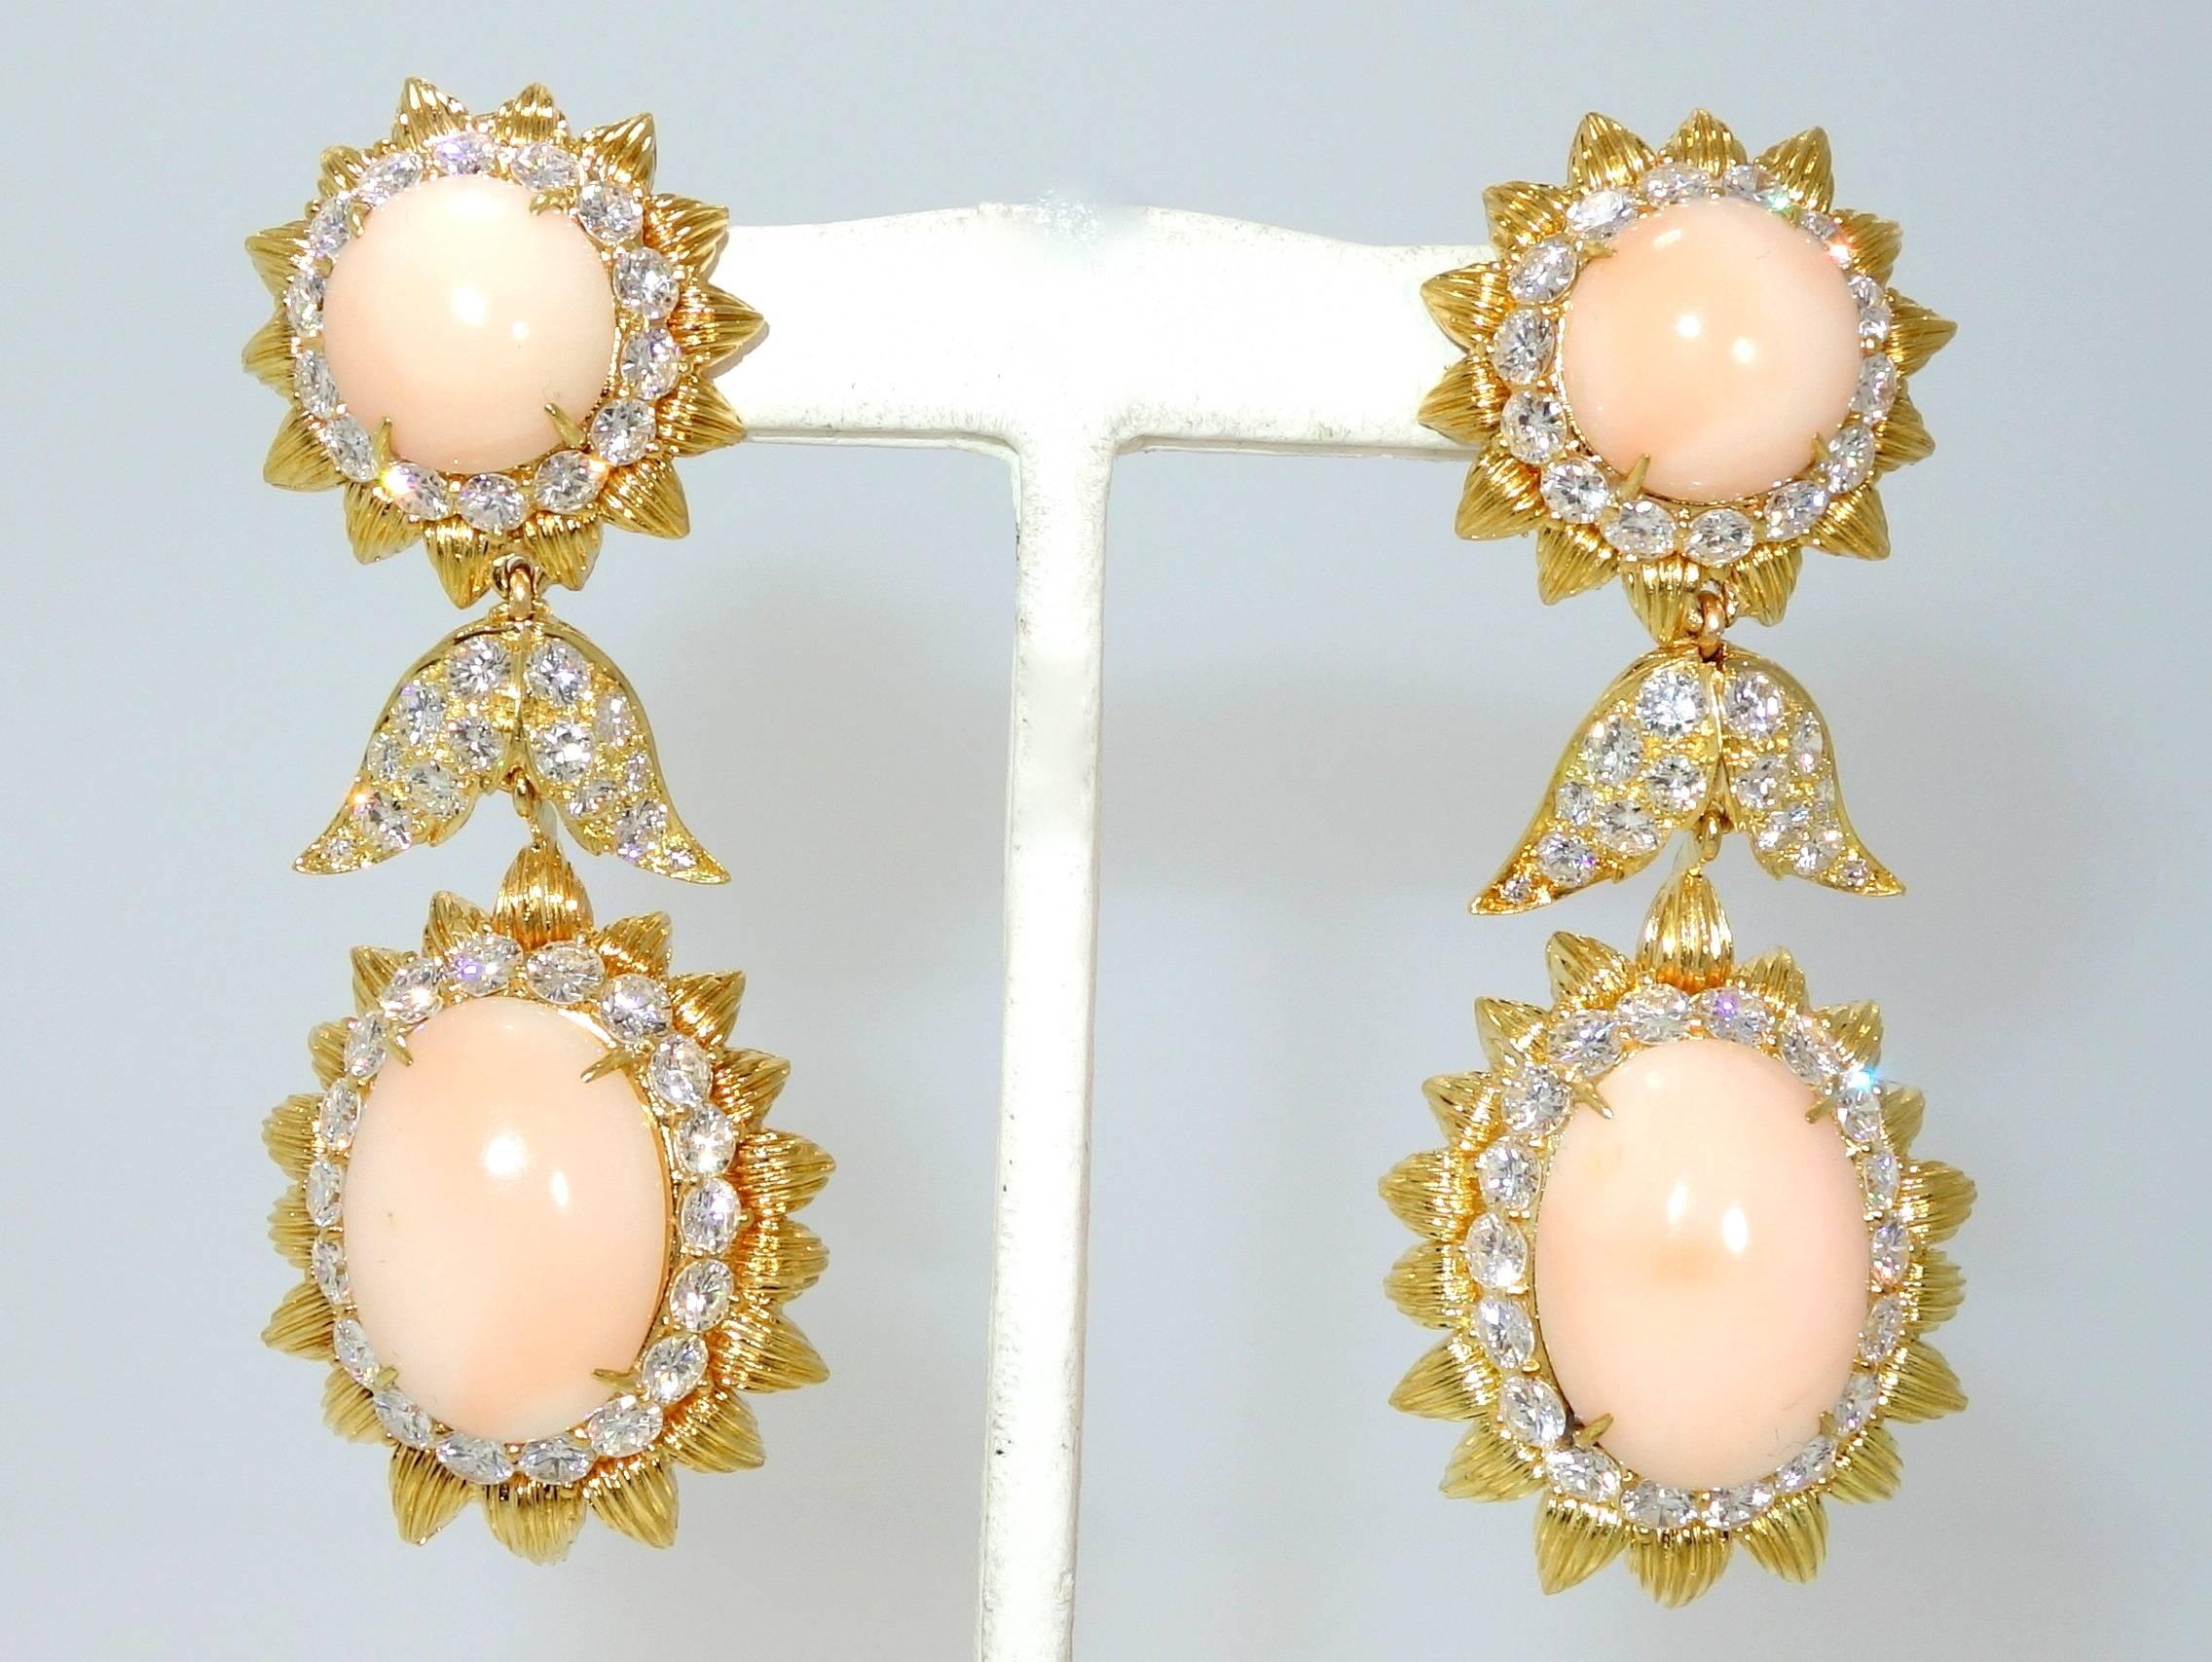 Circa 1960 with 92 fine white round diamonds weighing approximately 10 cts., accenting the center angle skin coral, these 18K earrings are a dramatic - over 2.5 inches long - and classic statement for the ear.